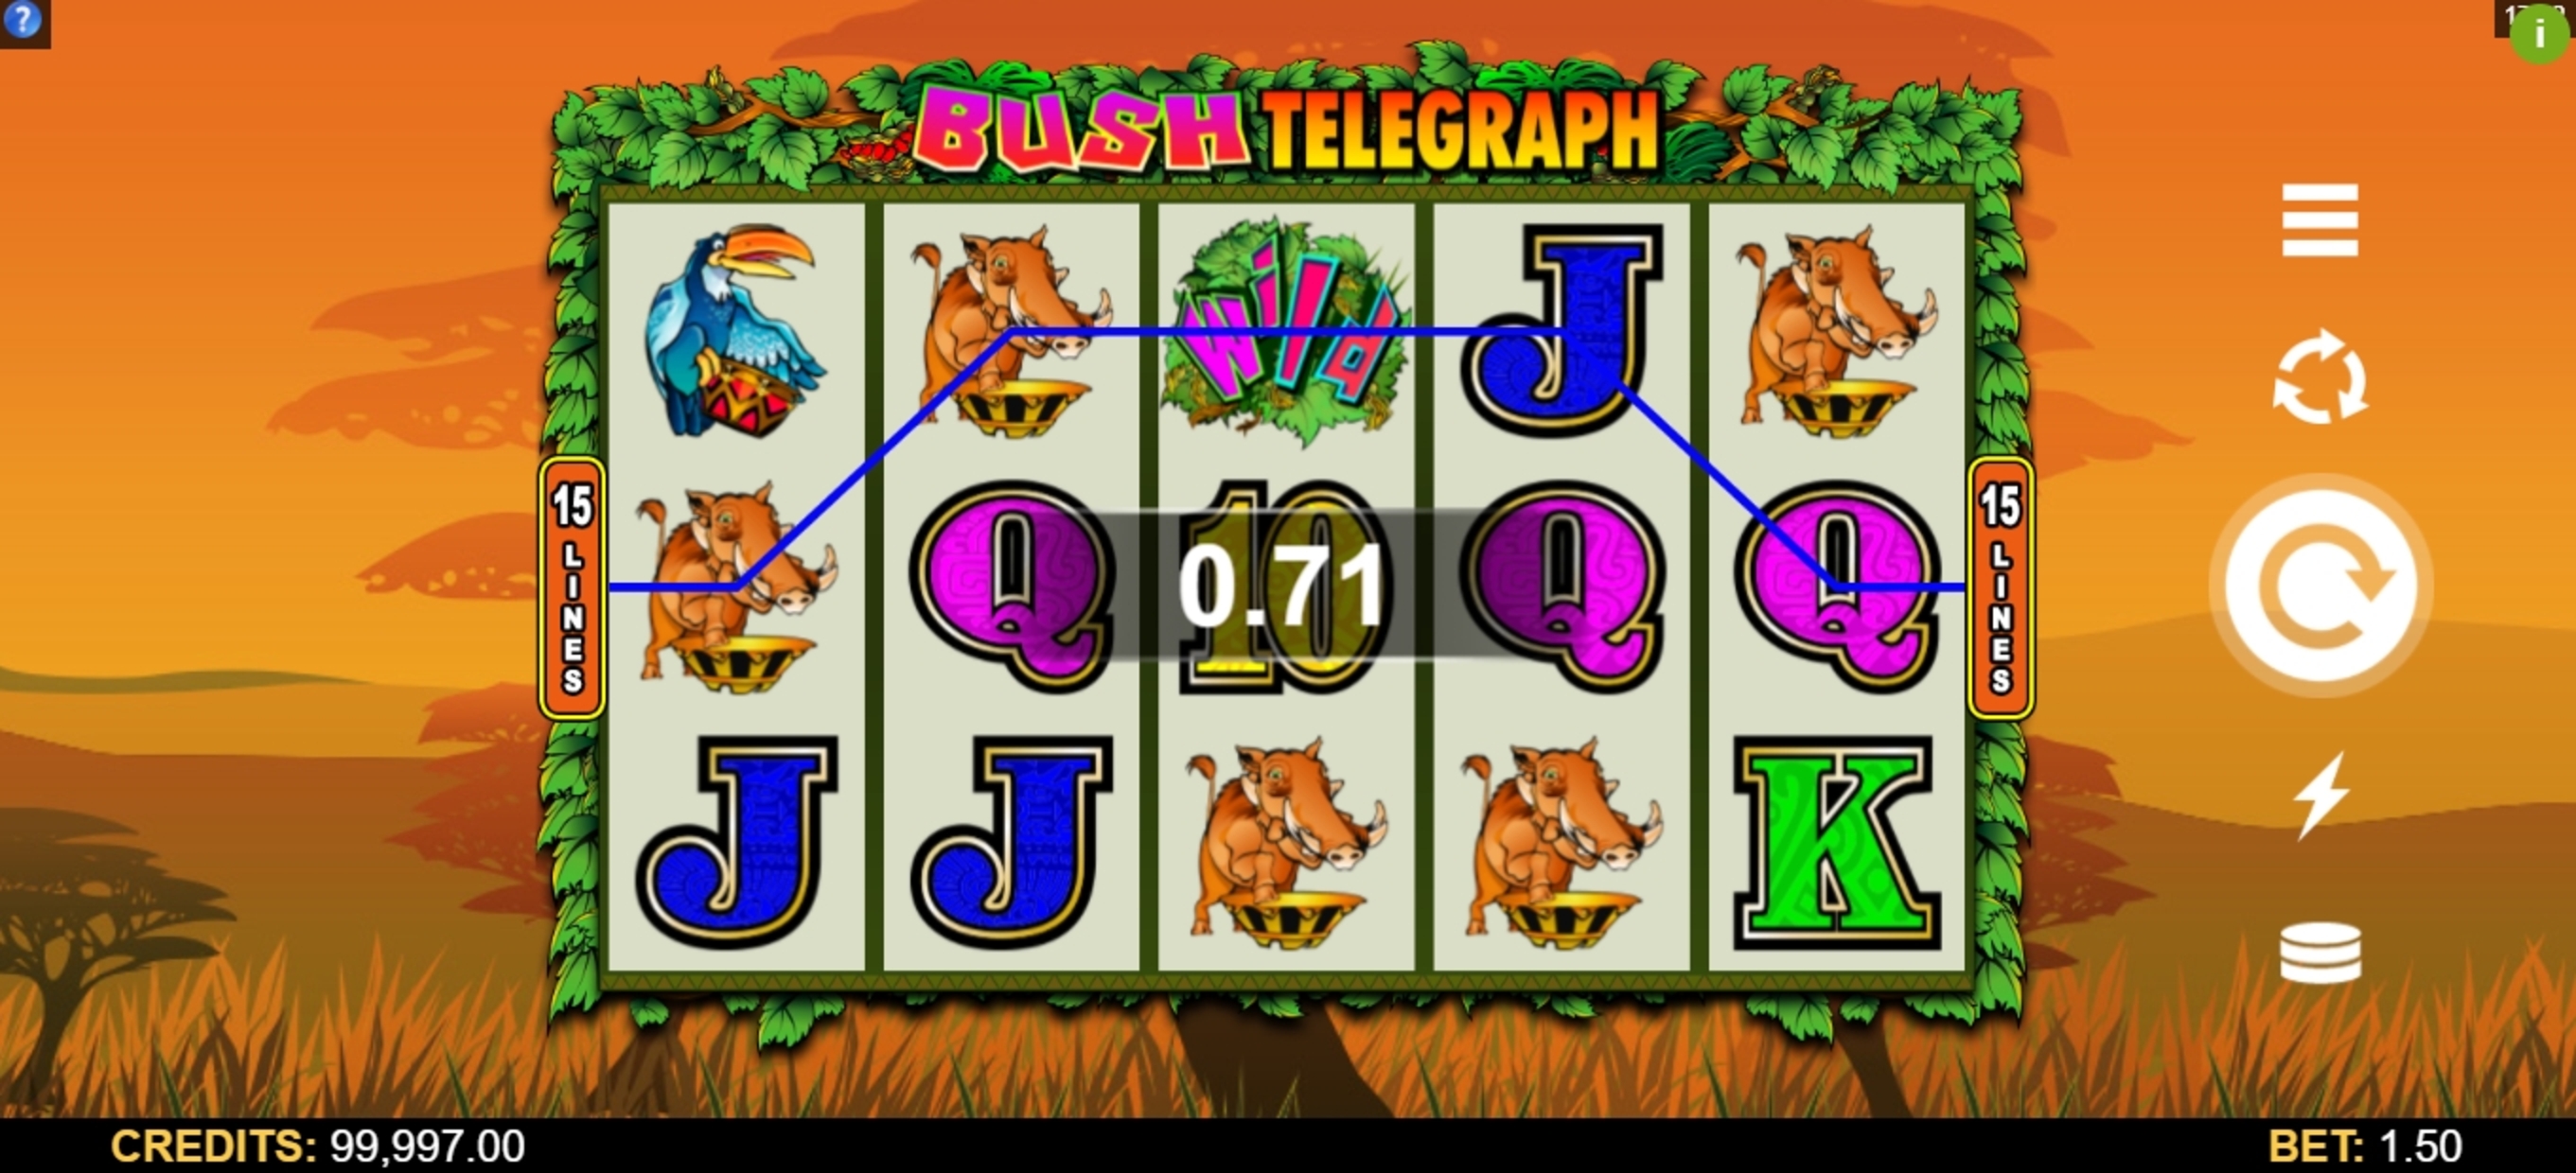 Win Money in Bush Telegraph Free Slot Game by Microgaming